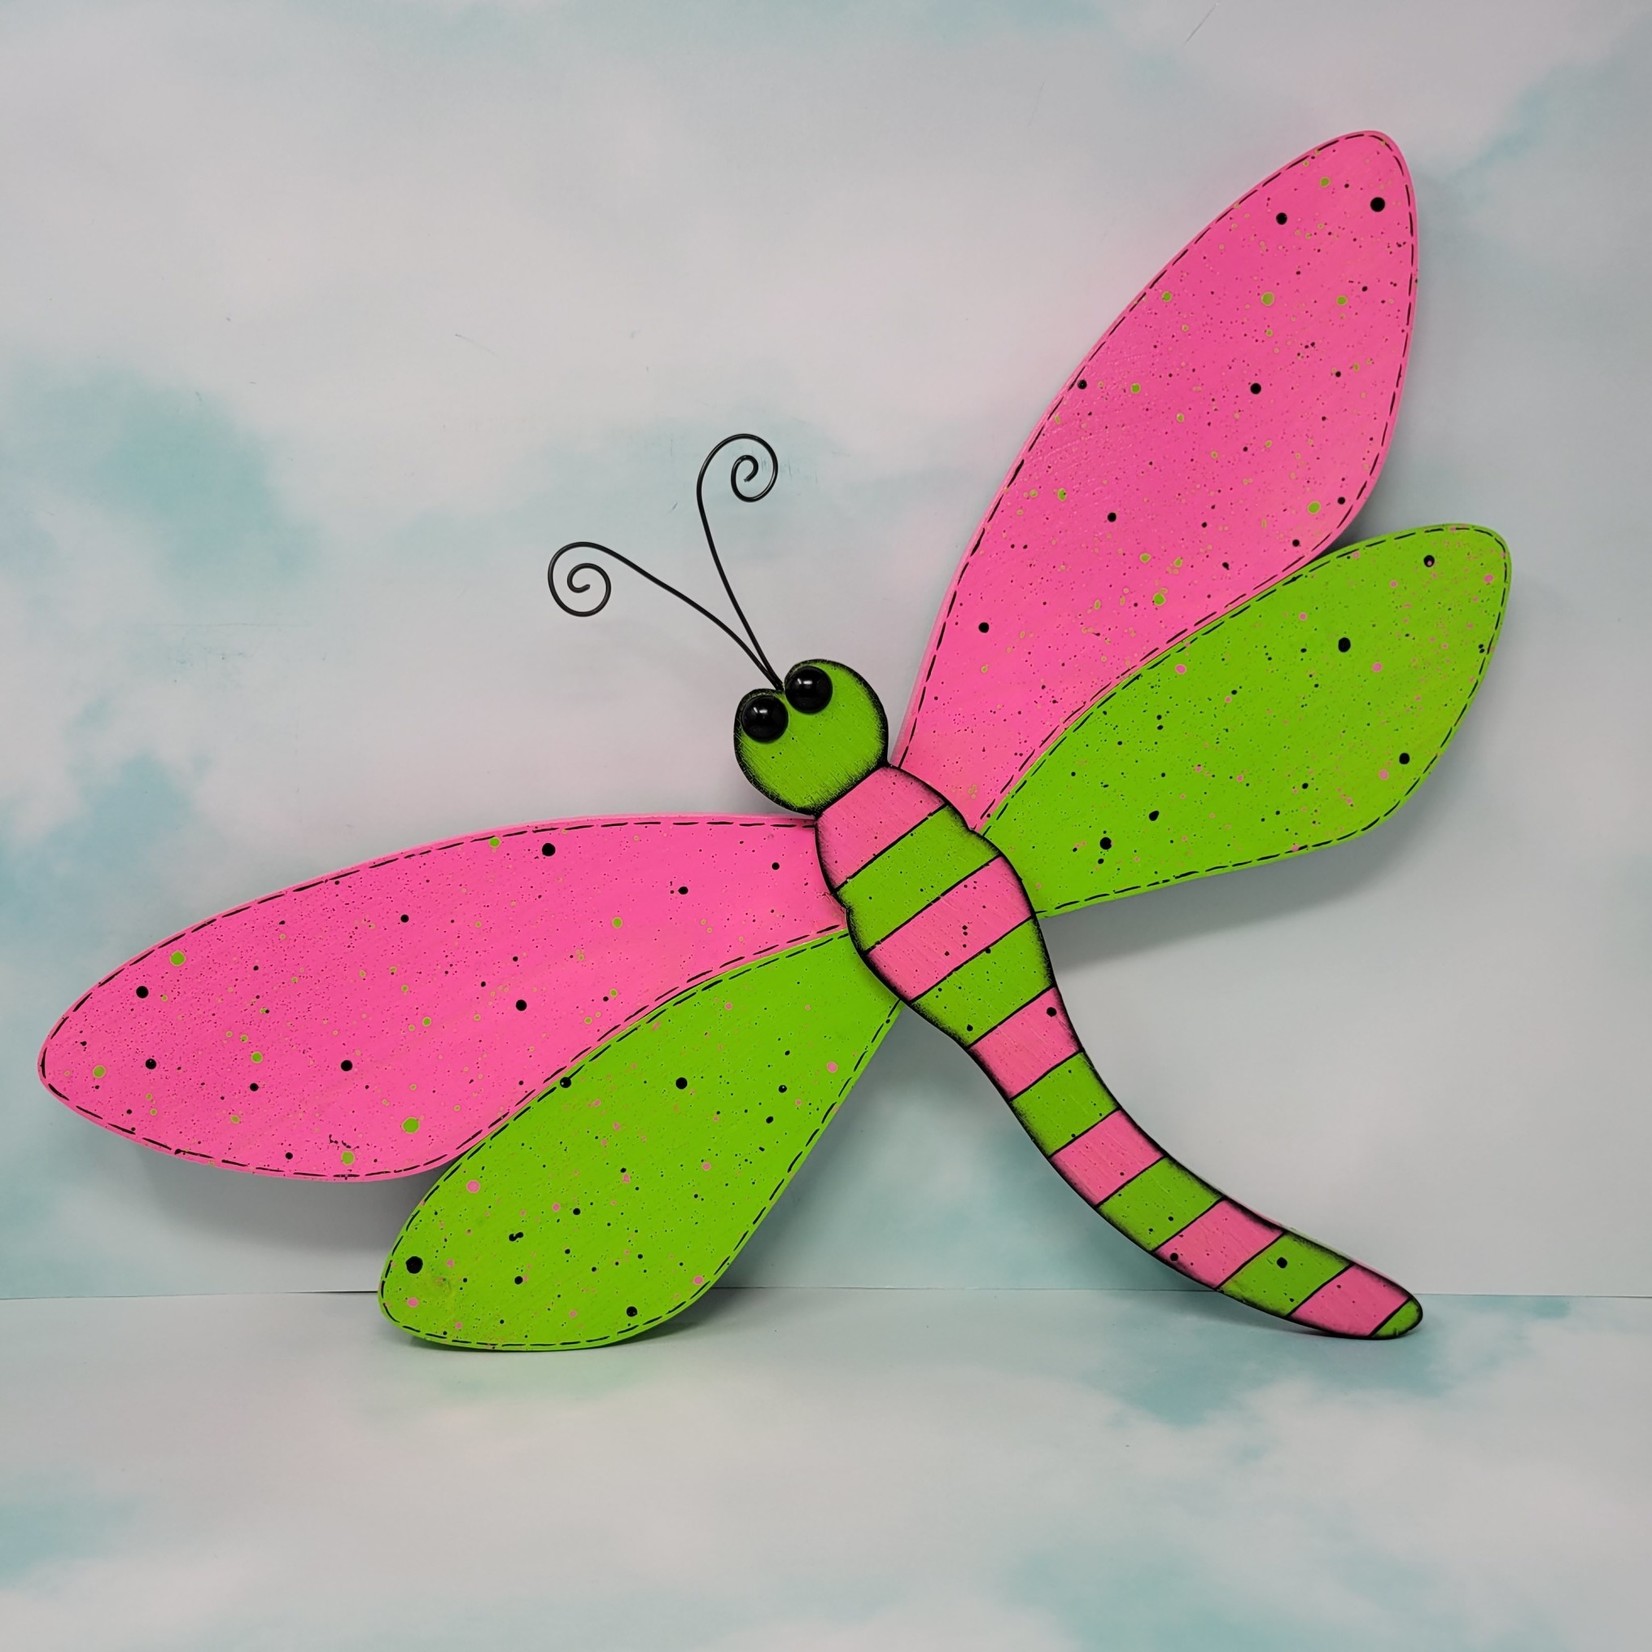 Sharon's Large Wooden Dragonfly